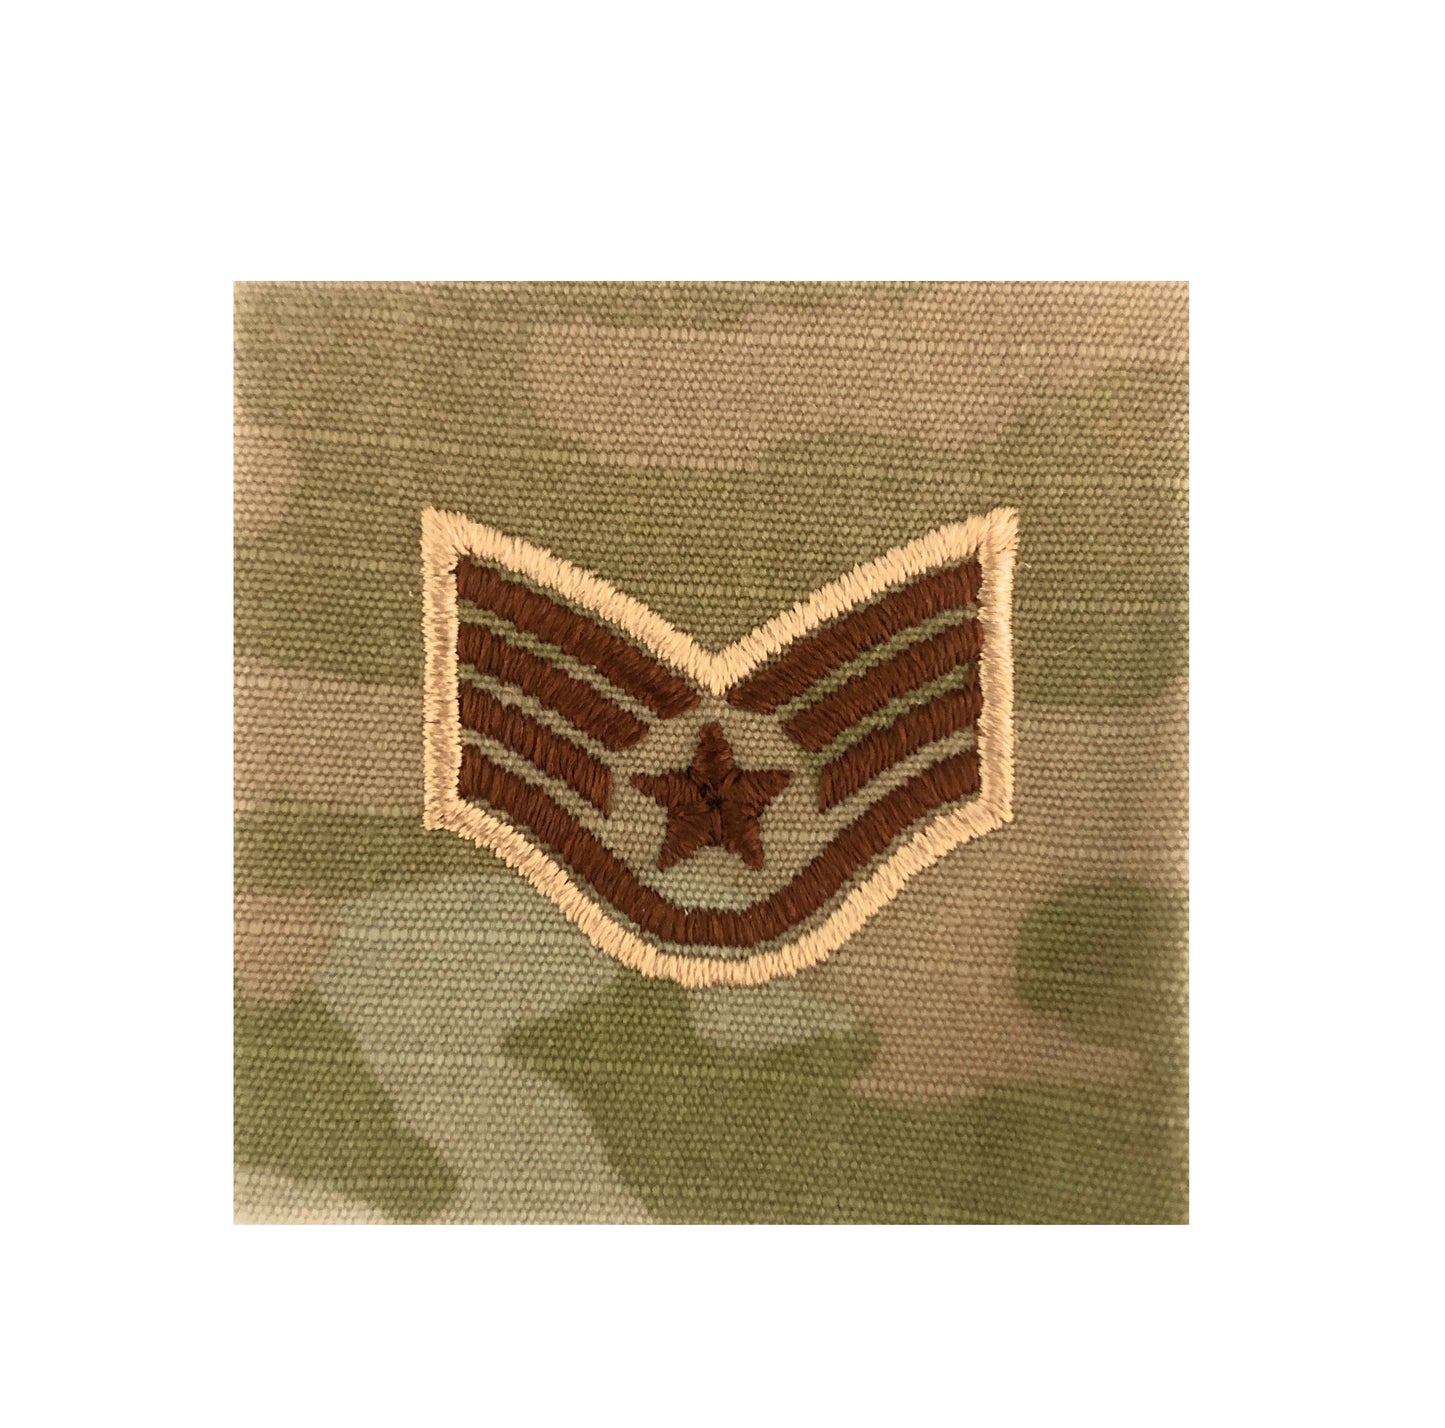 U.S. Air Force E5 Staff Sergeant OCP Spice Brown Sew-On Rank (For Shirt, Jacket, Coat) (each)